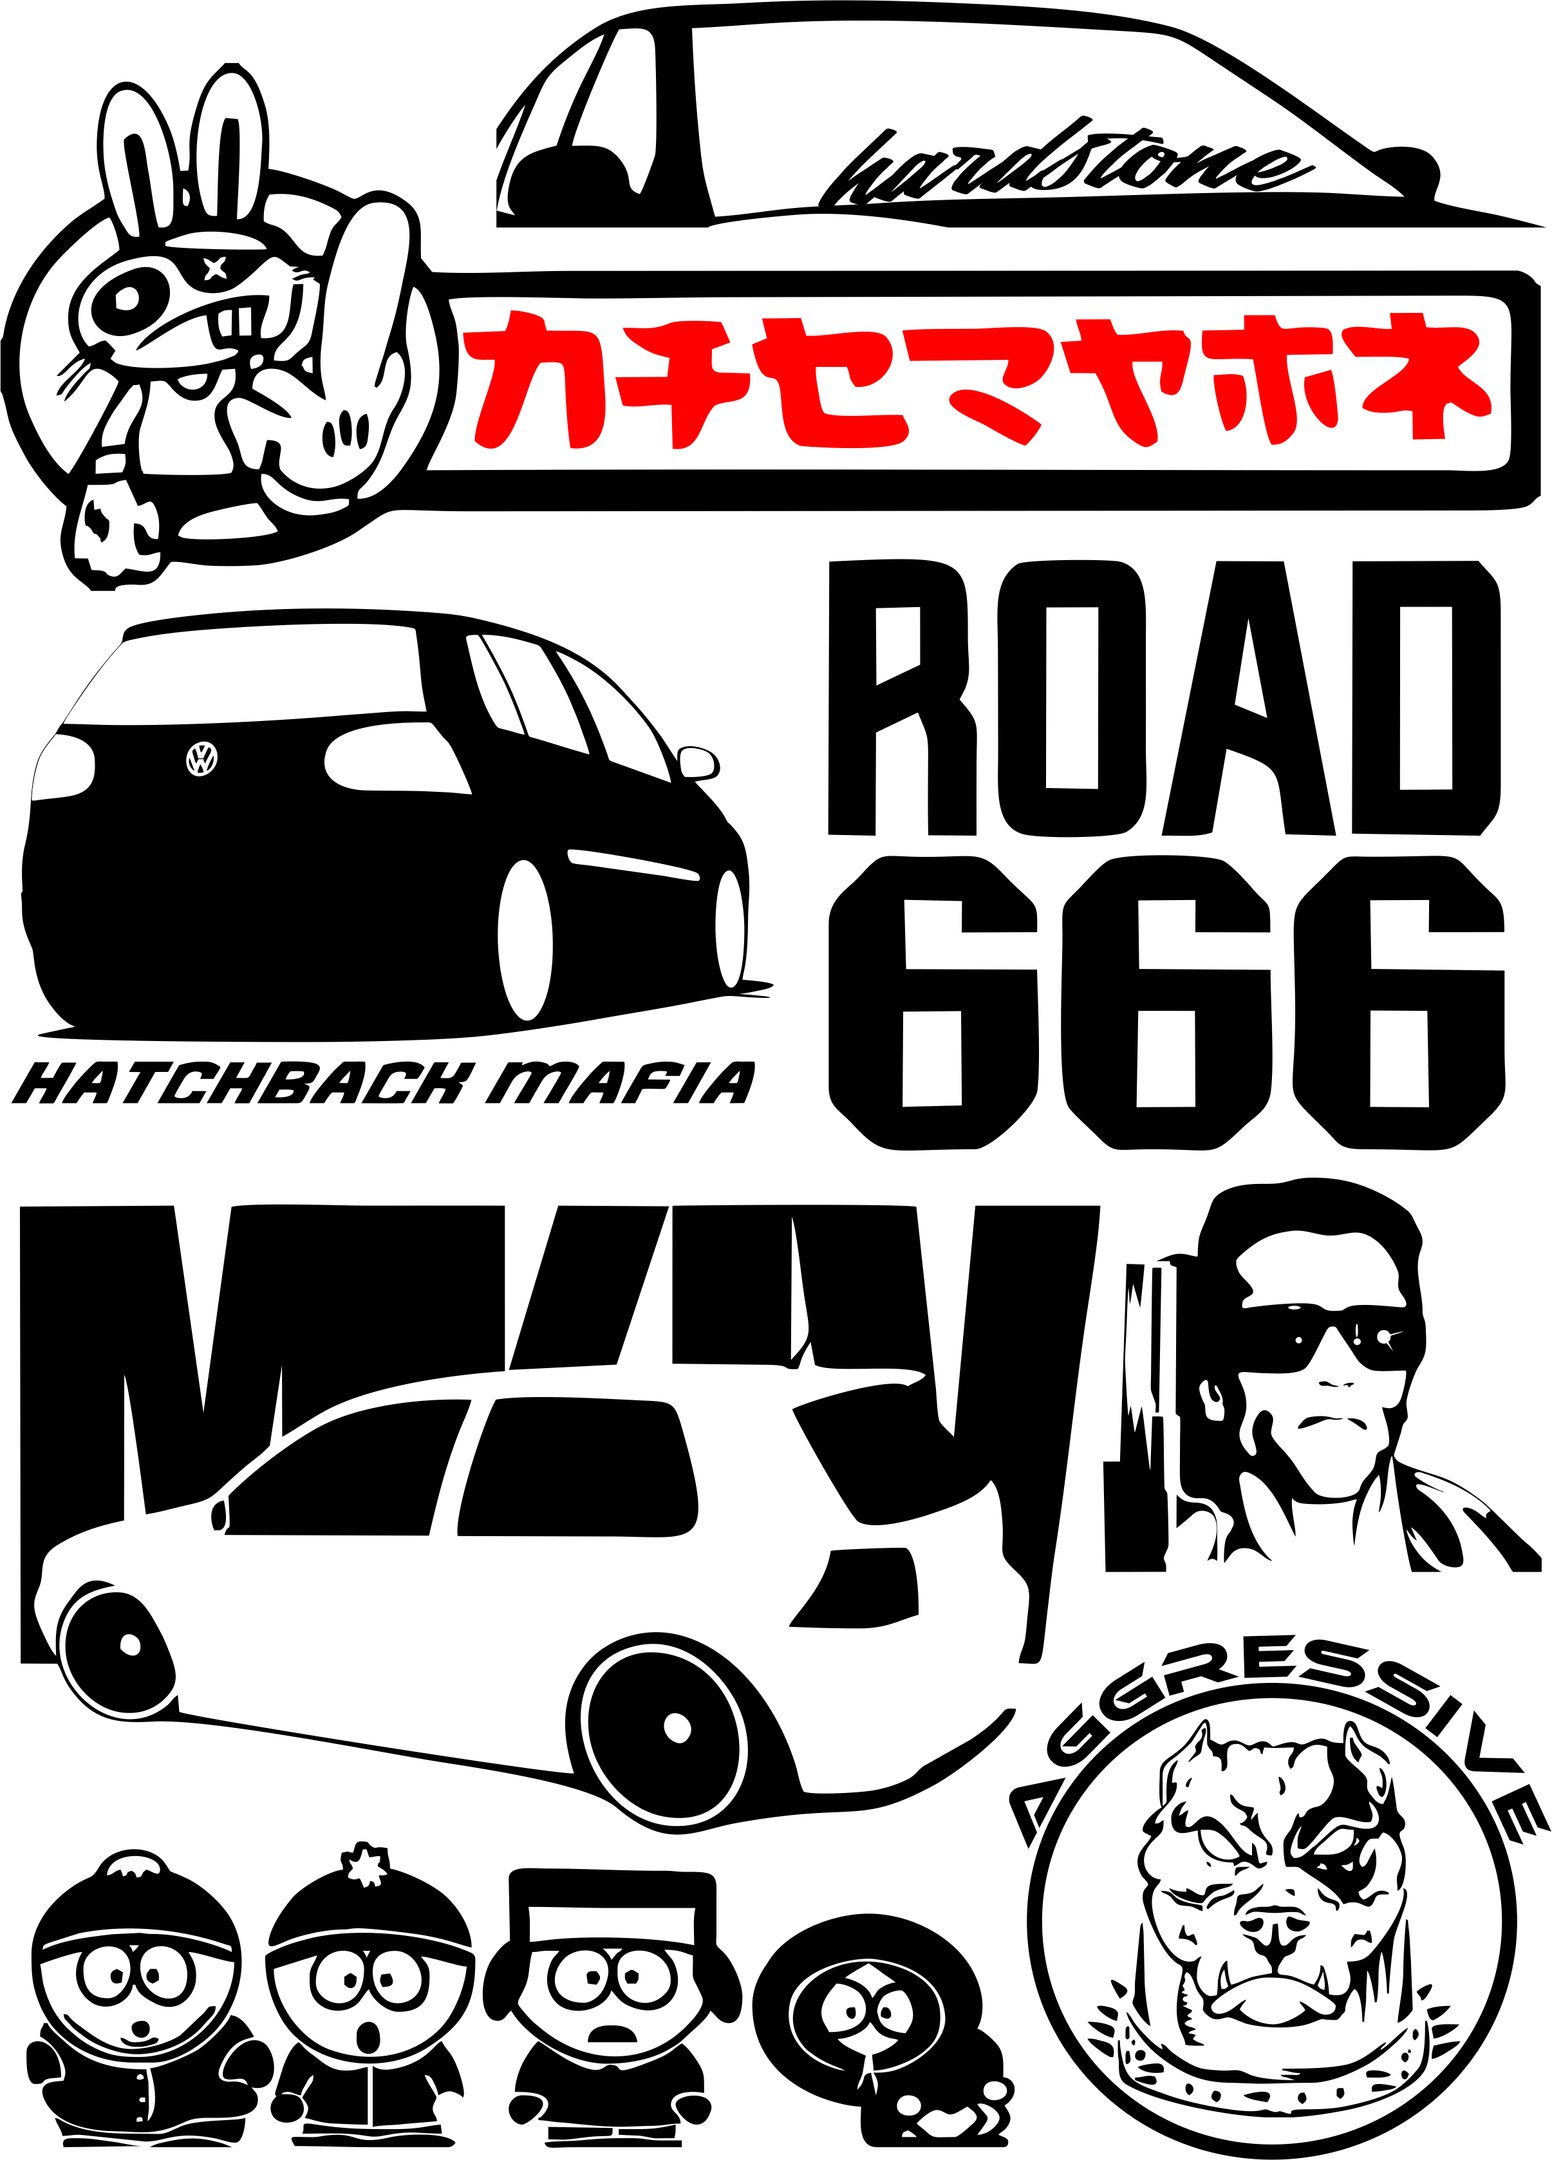 Stickers on Cars Set Vector Free Vector cdr Download - 3axis.co